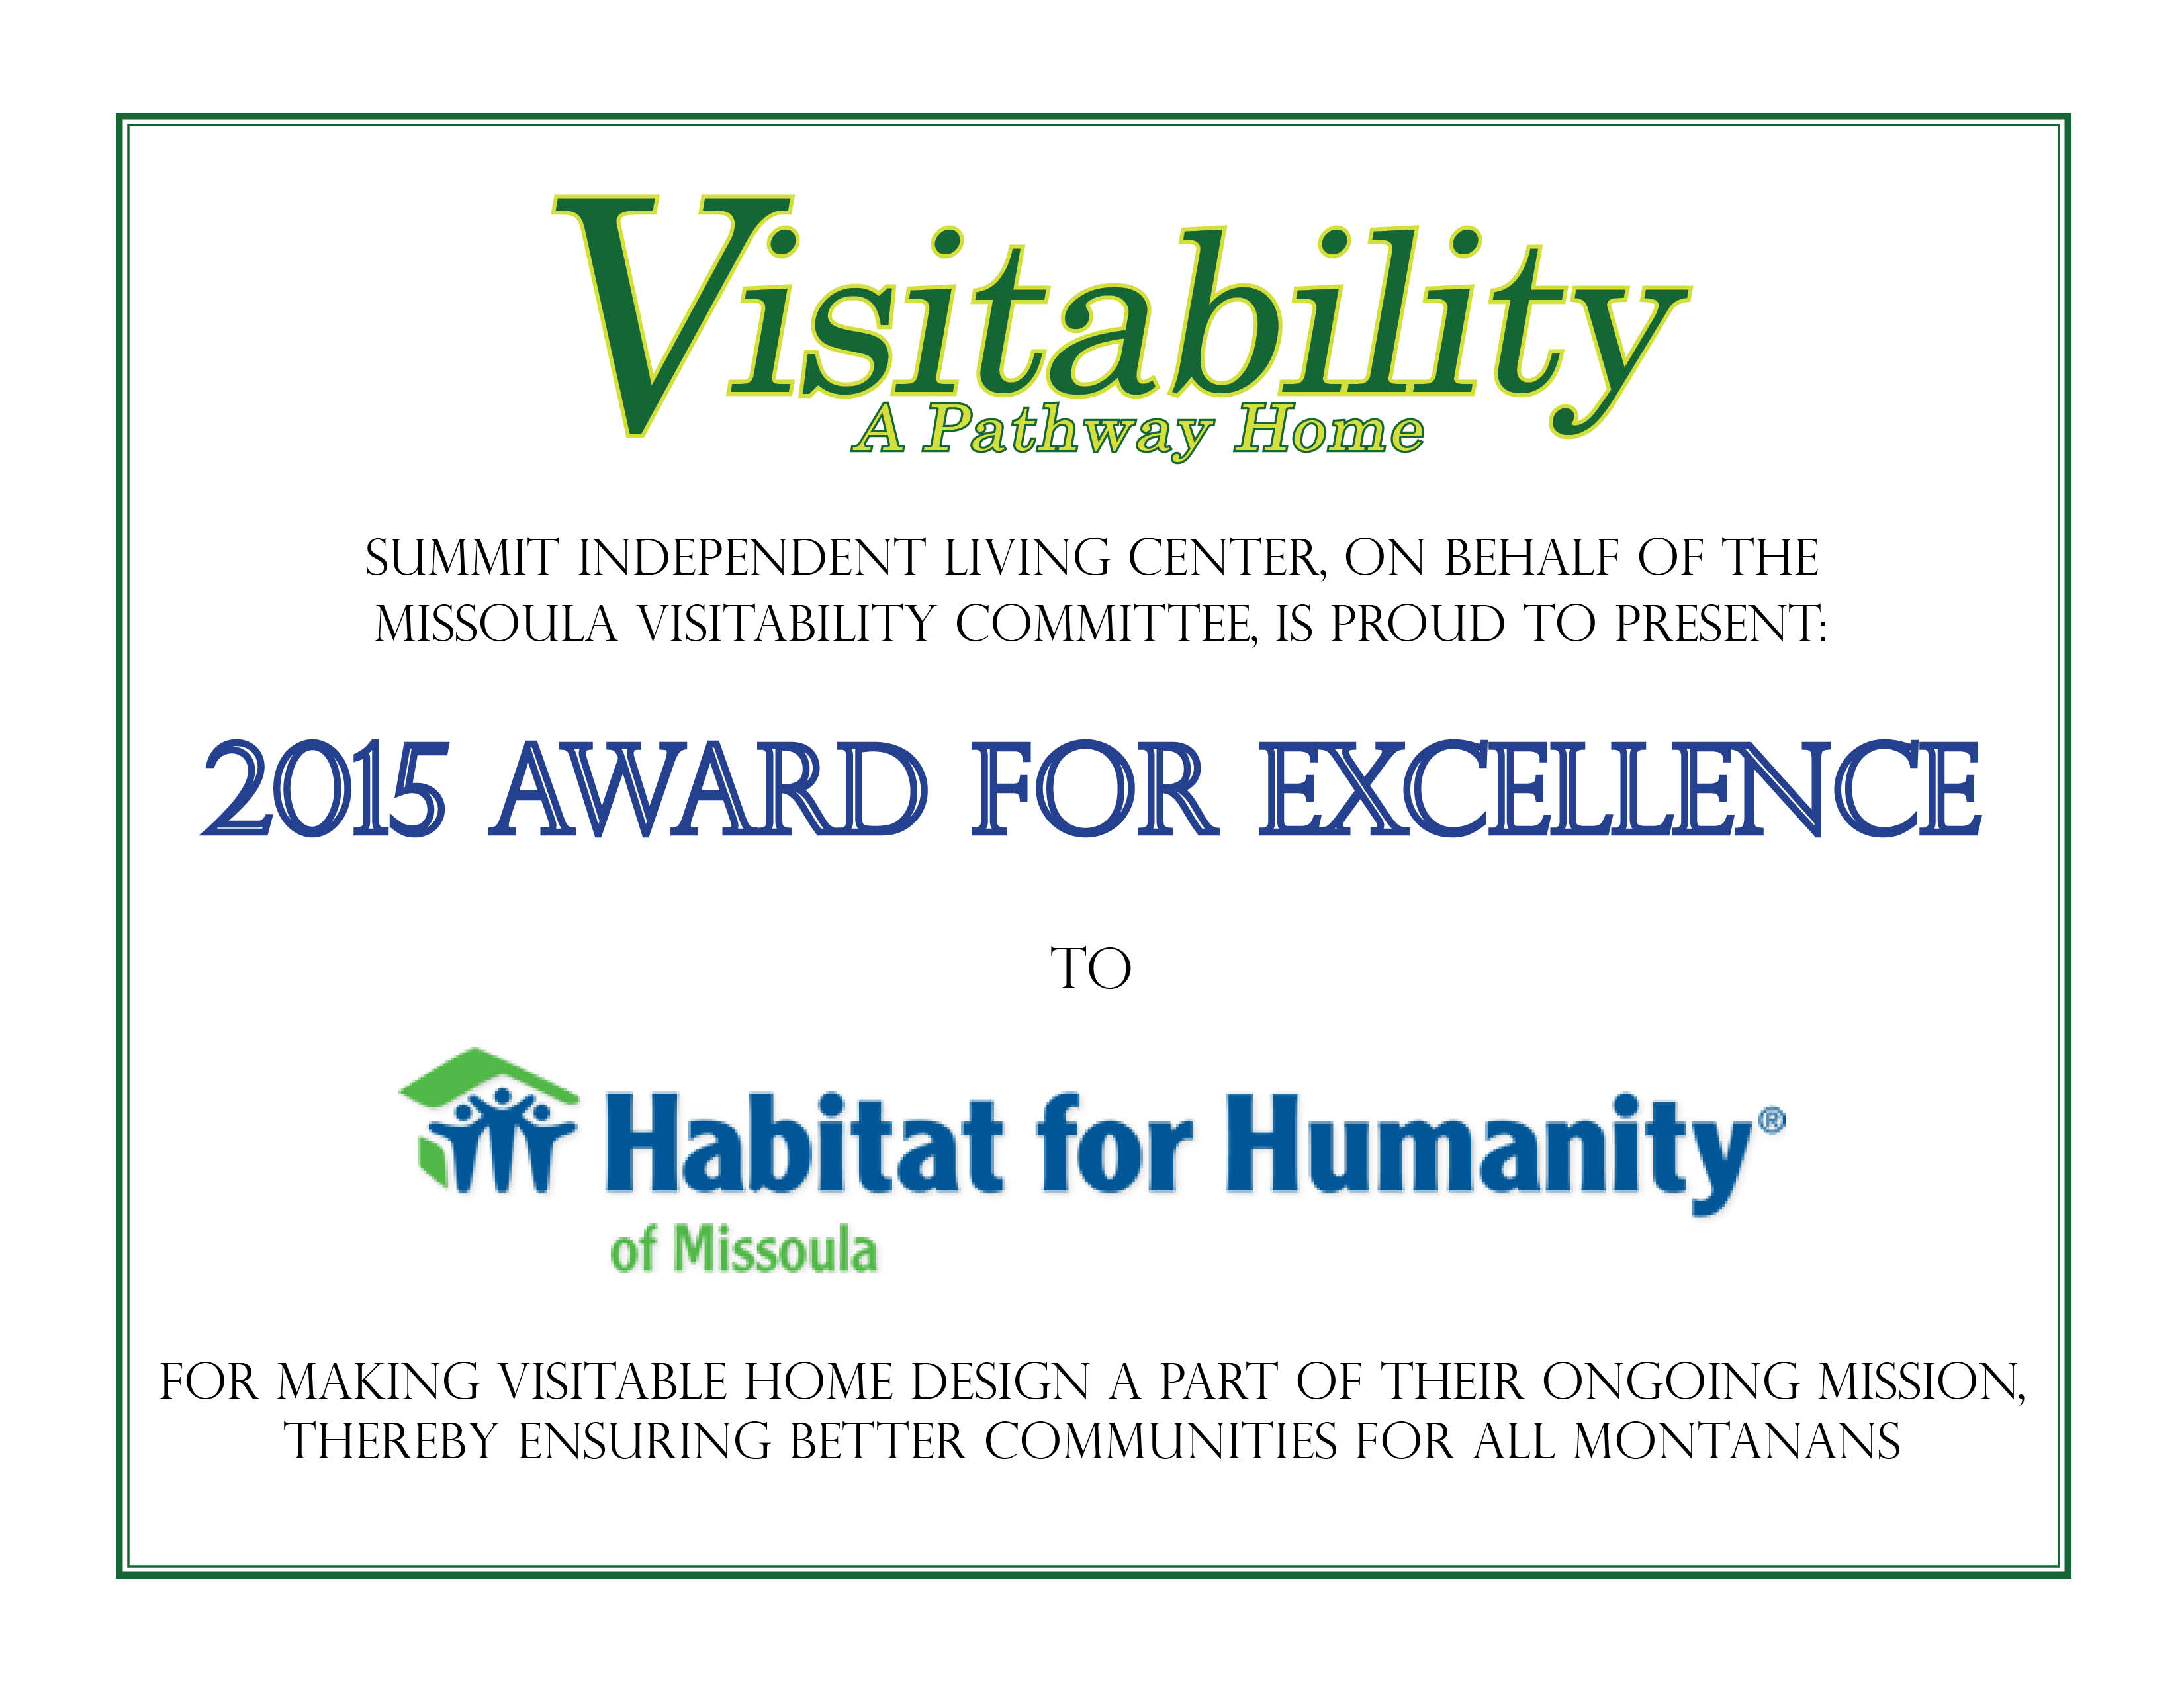 2015 Award for Excellence - Summit Independent Living Center, on behalf of the Missoula Visitability Committee, is proud to present: 2015 Award for Excellence to Habitat for Humanity of Missoula for making Visitable Home Design a part of their ongoing mission, thereby ensuring better communities for all Montanans.